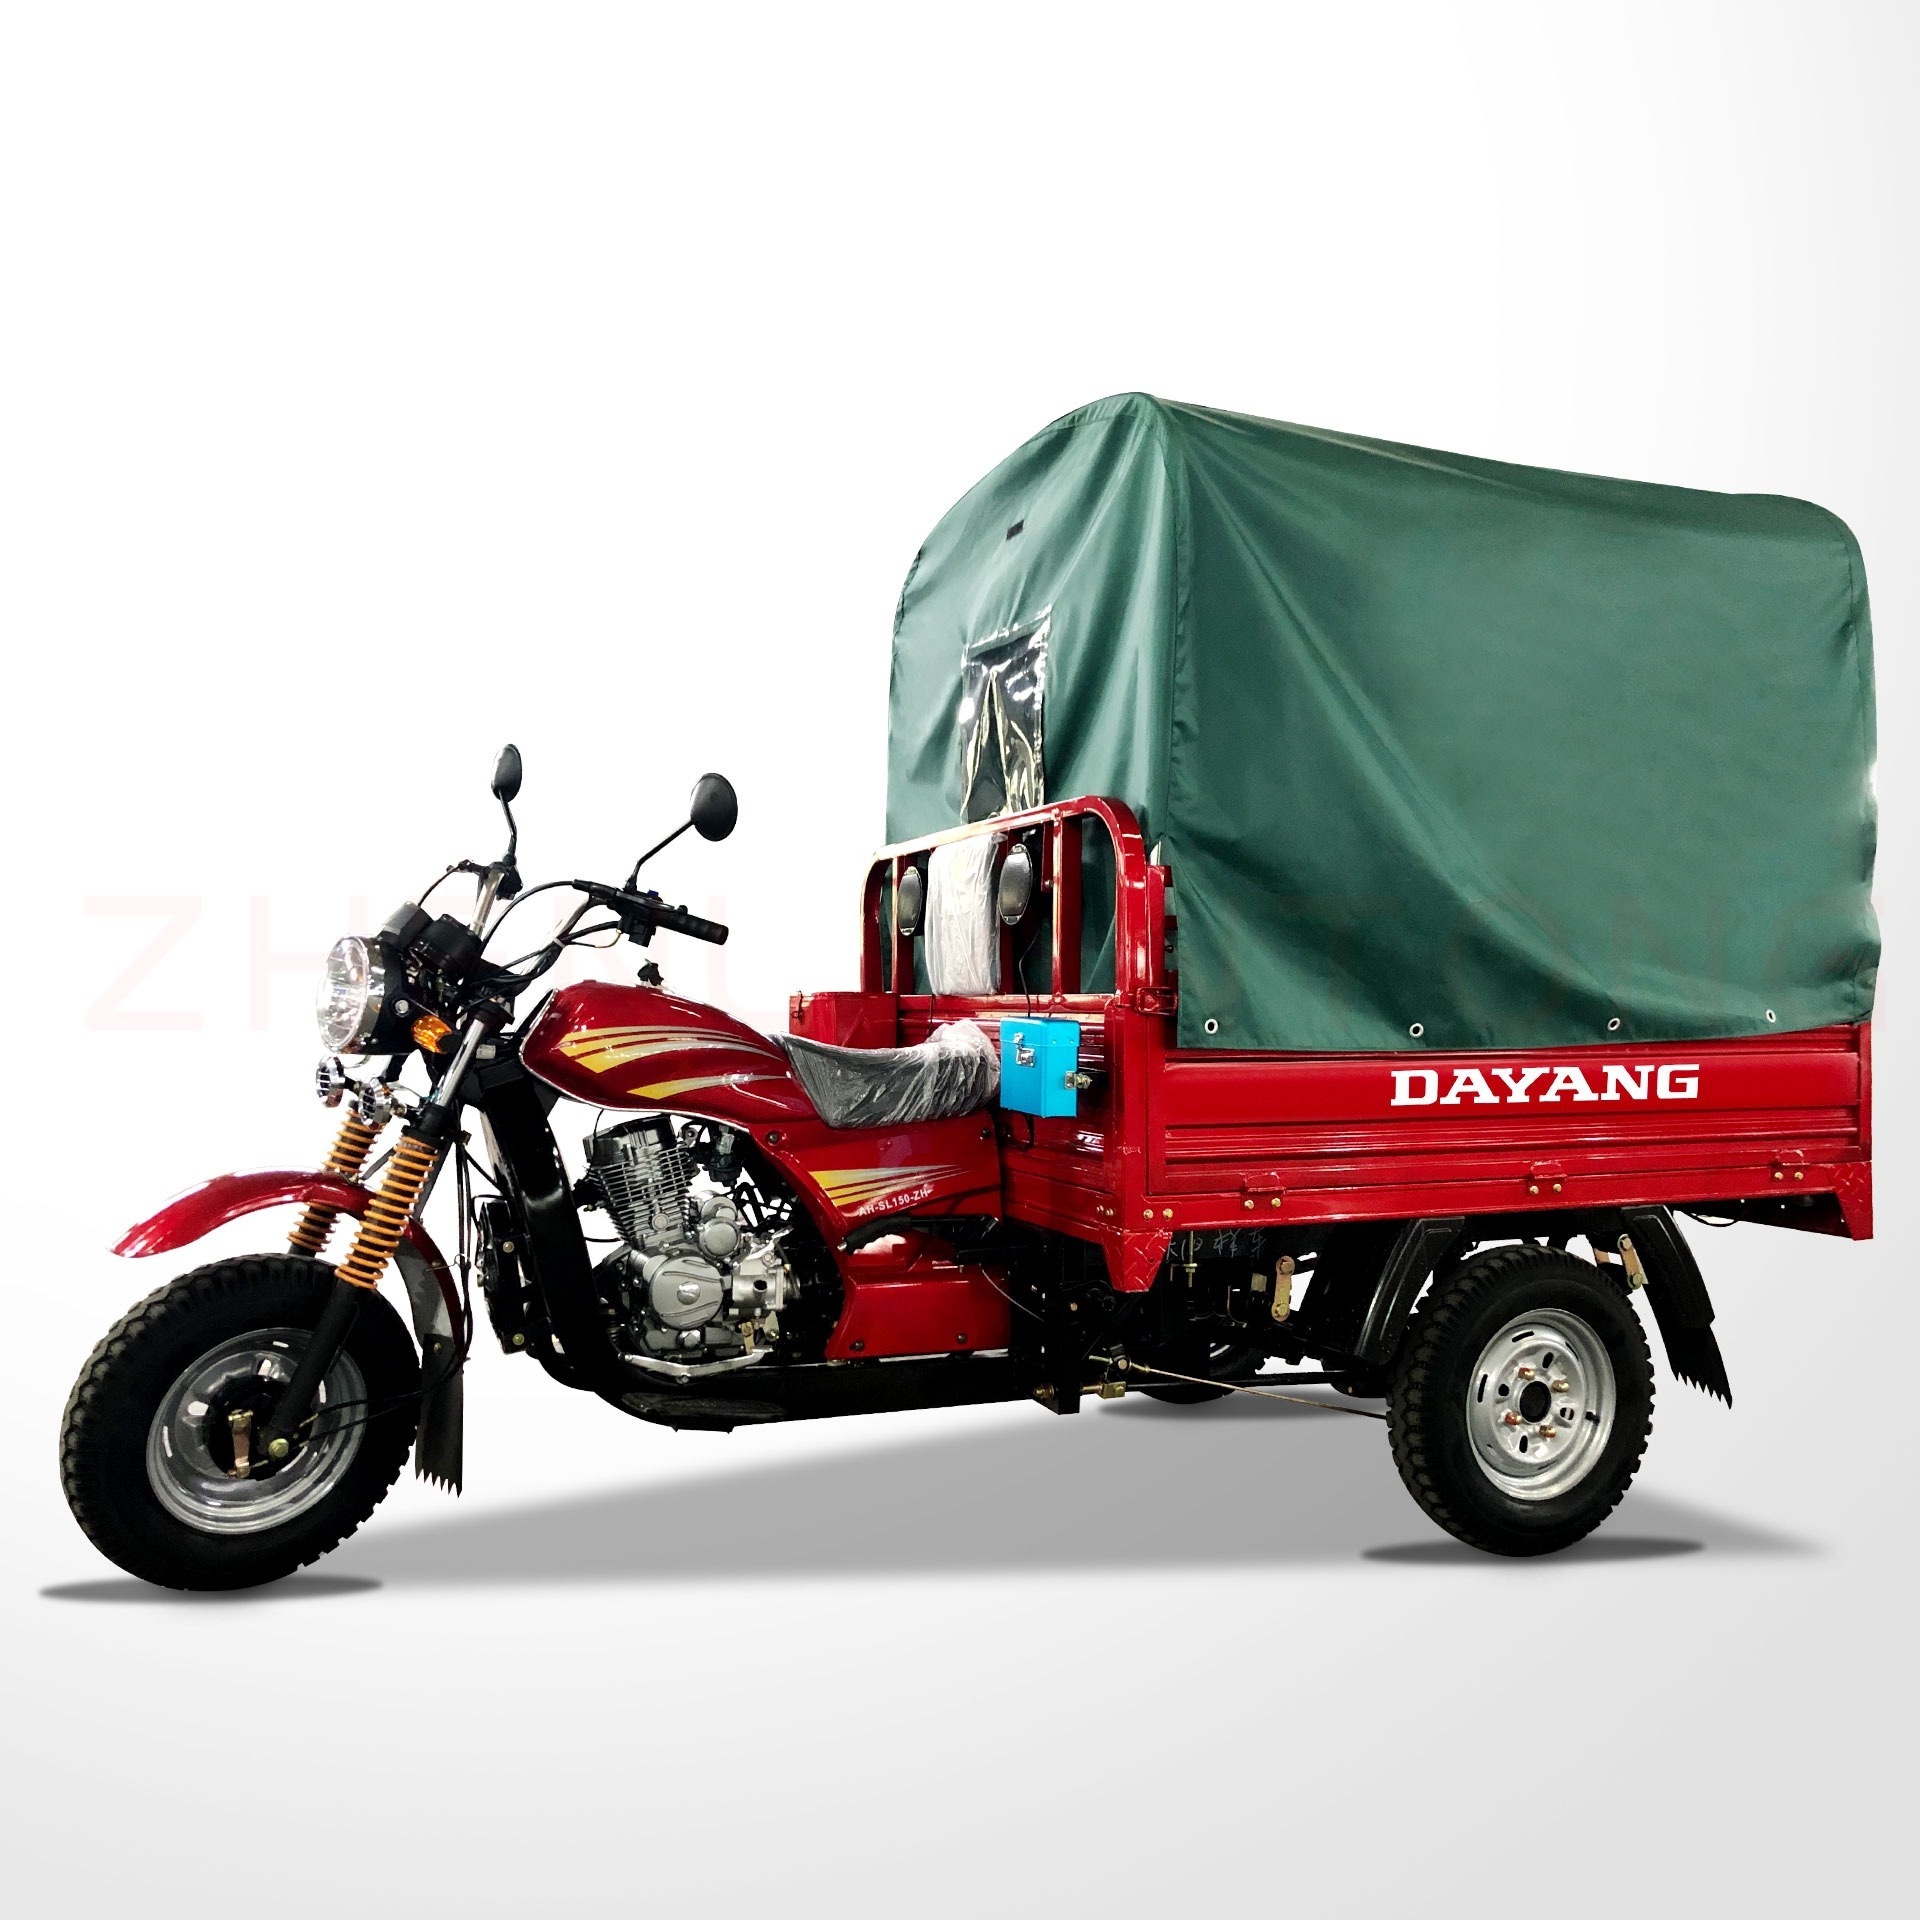 Adult Motorcycle 3 Wheeler of Cargo Motorized Tricycles for Sale